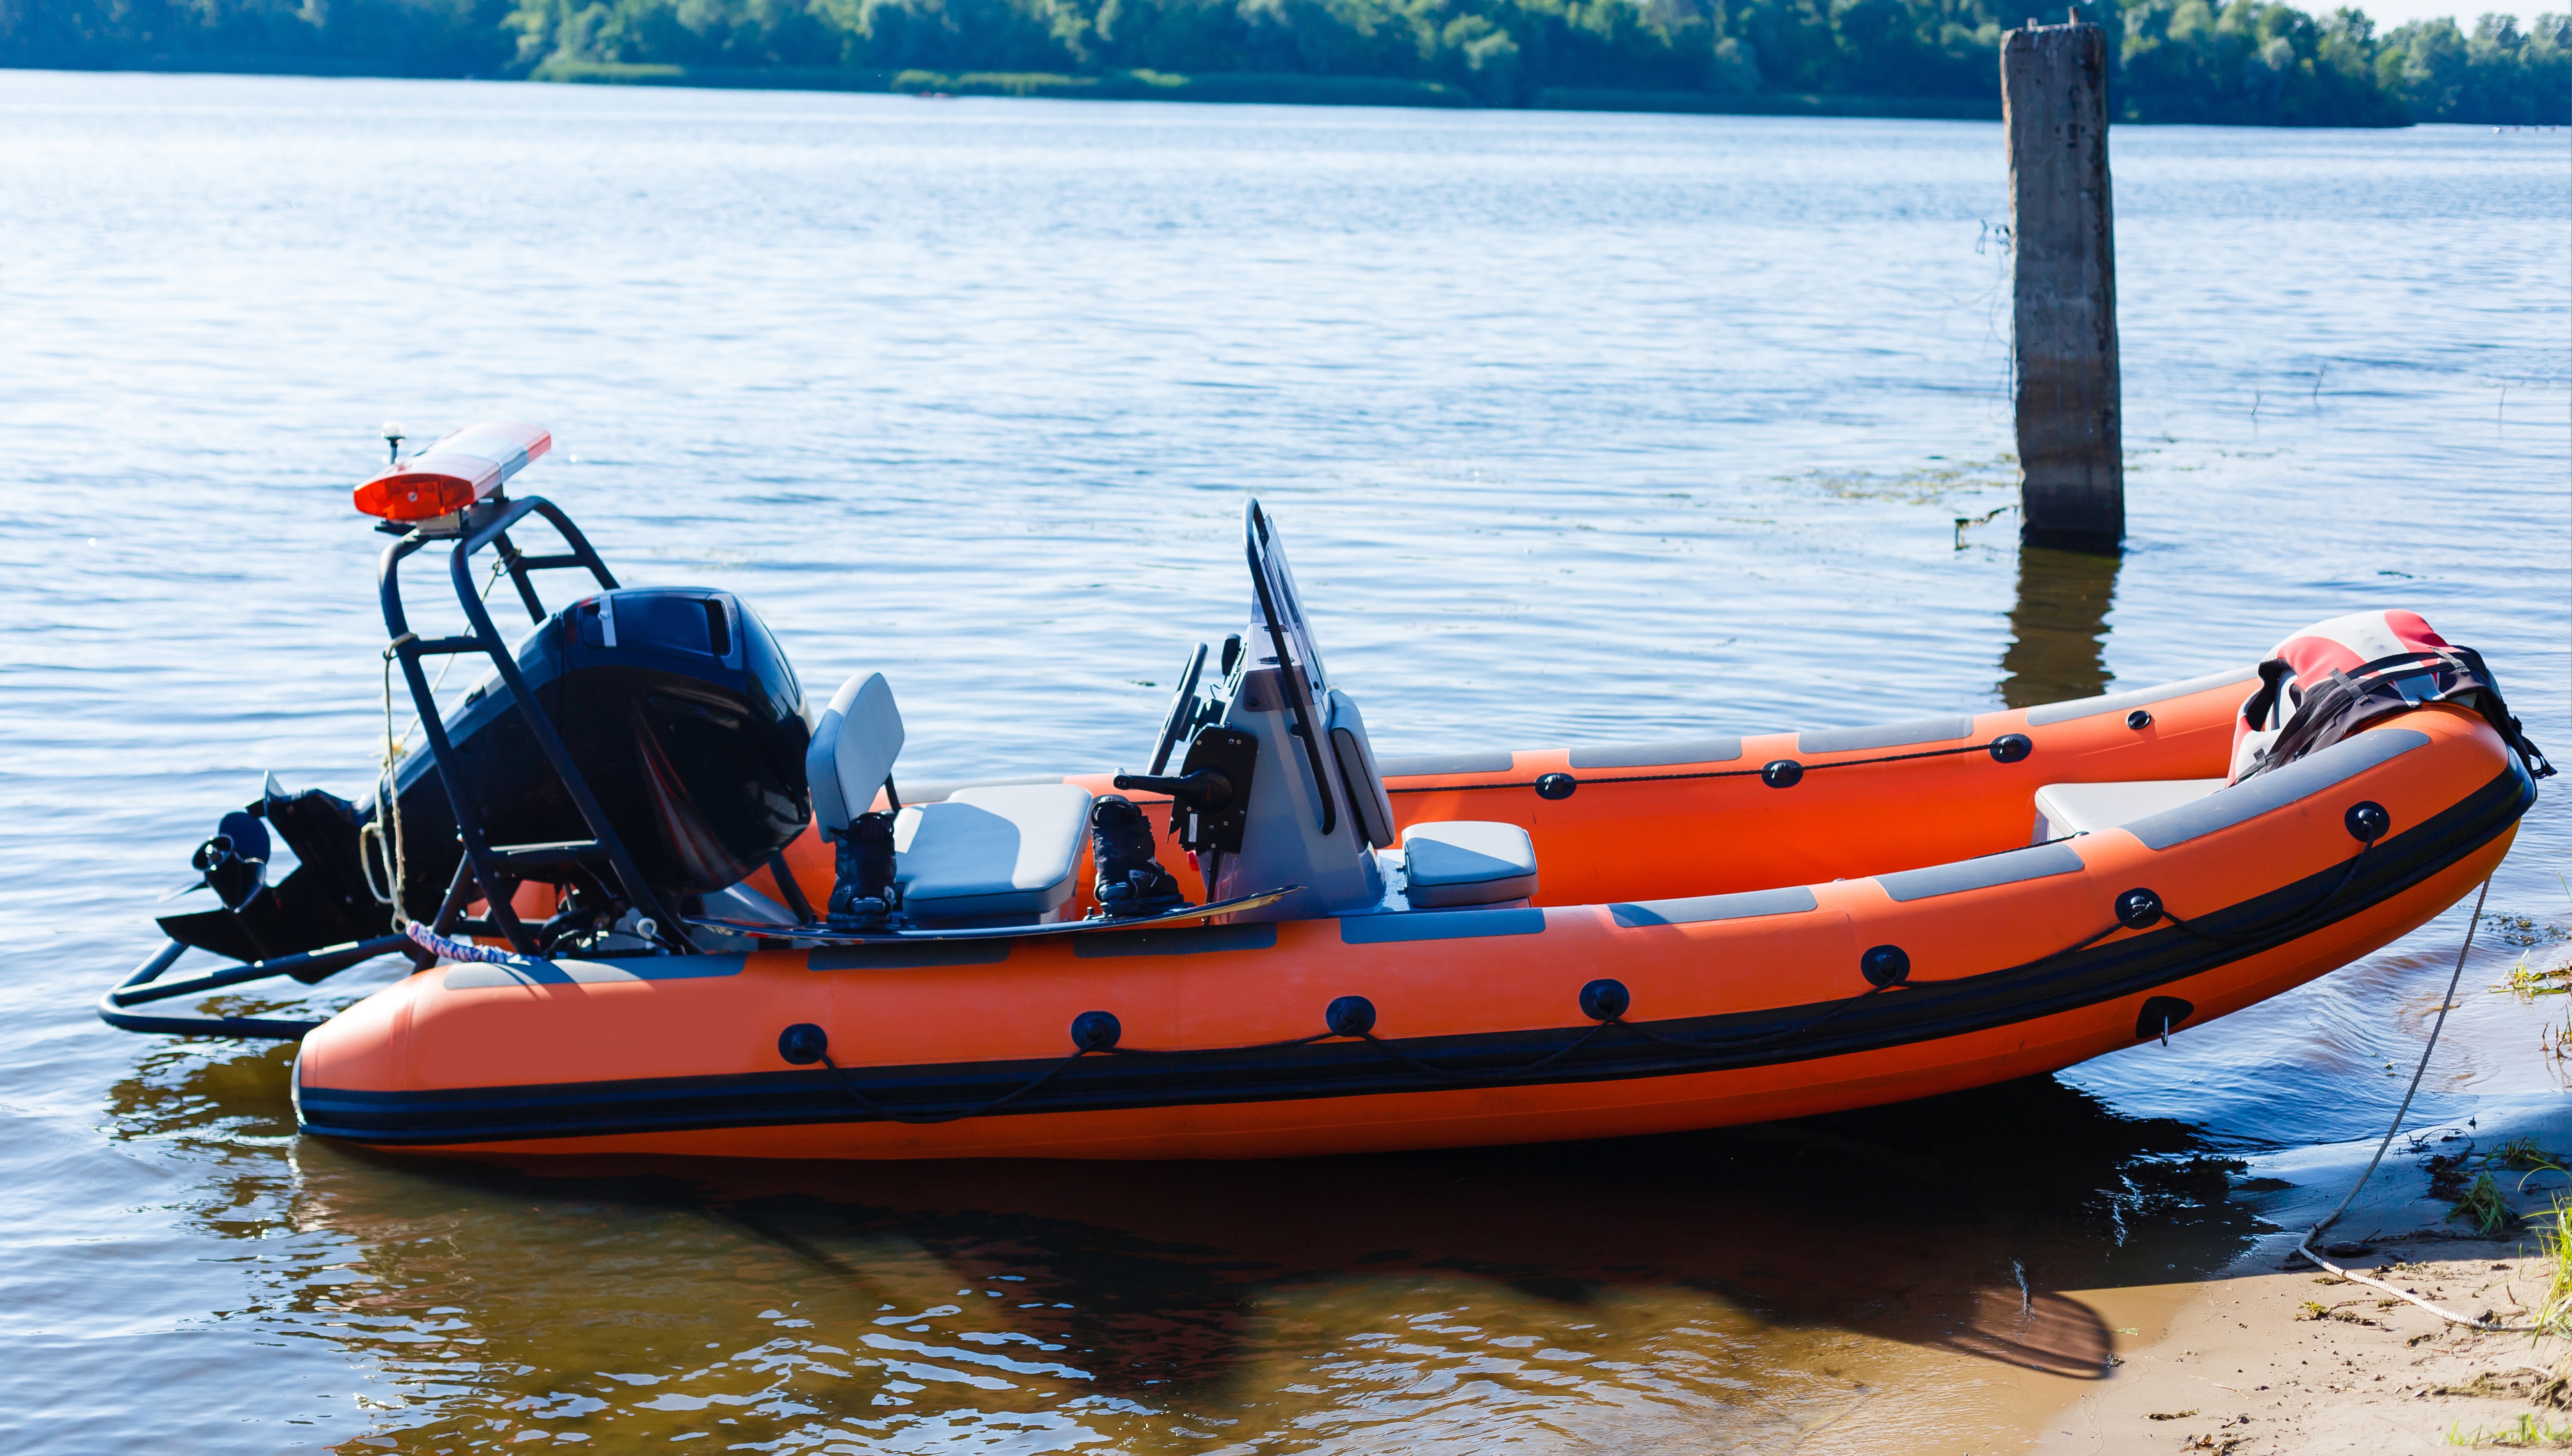 What Material are Inflatable Boats Made From and Which Cleaning Products Should be Used?